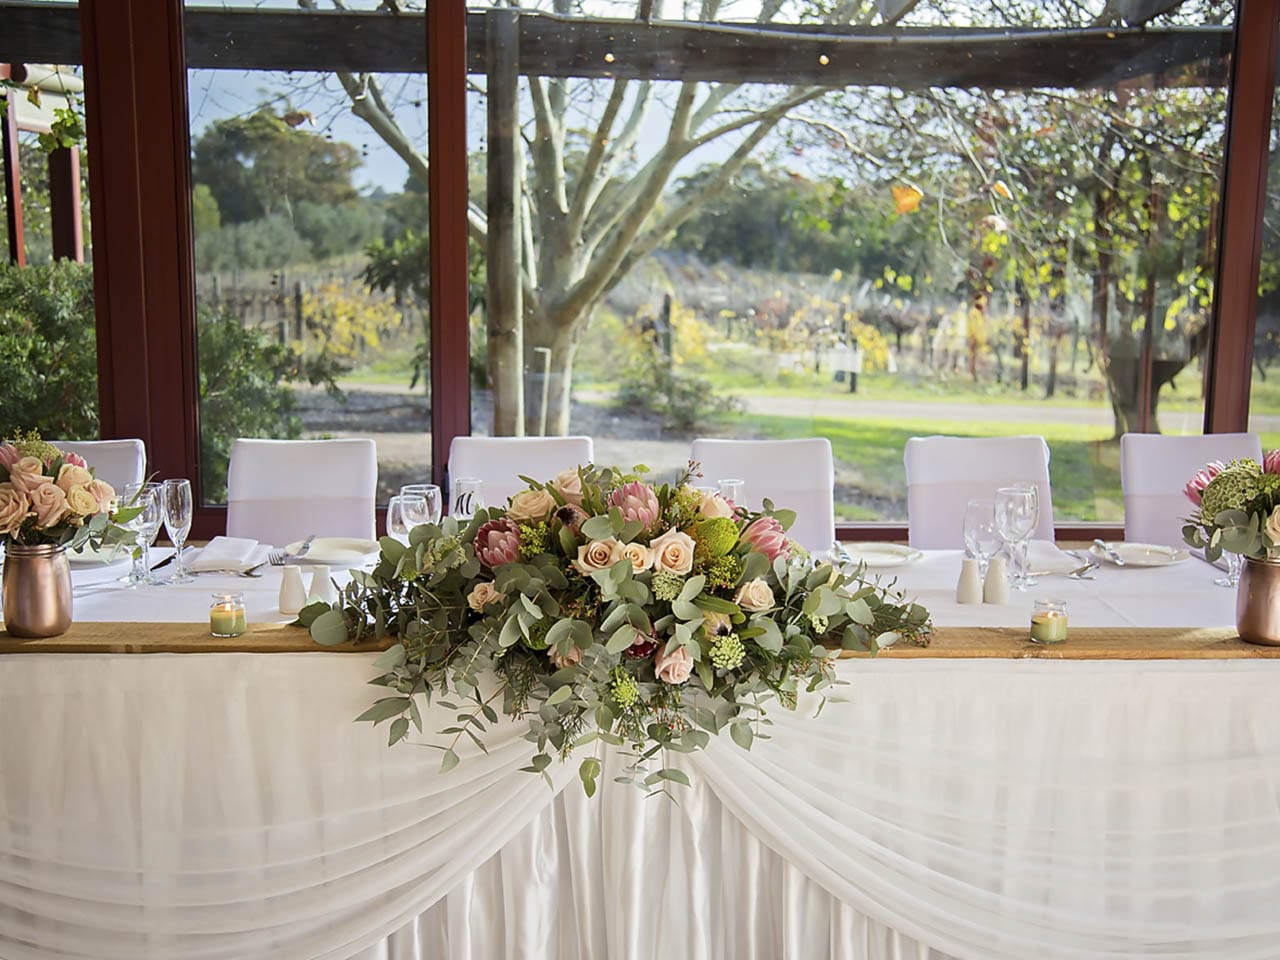 Wedding top table setting with bouquet of flowers, white seats and table decorations overlooking winery